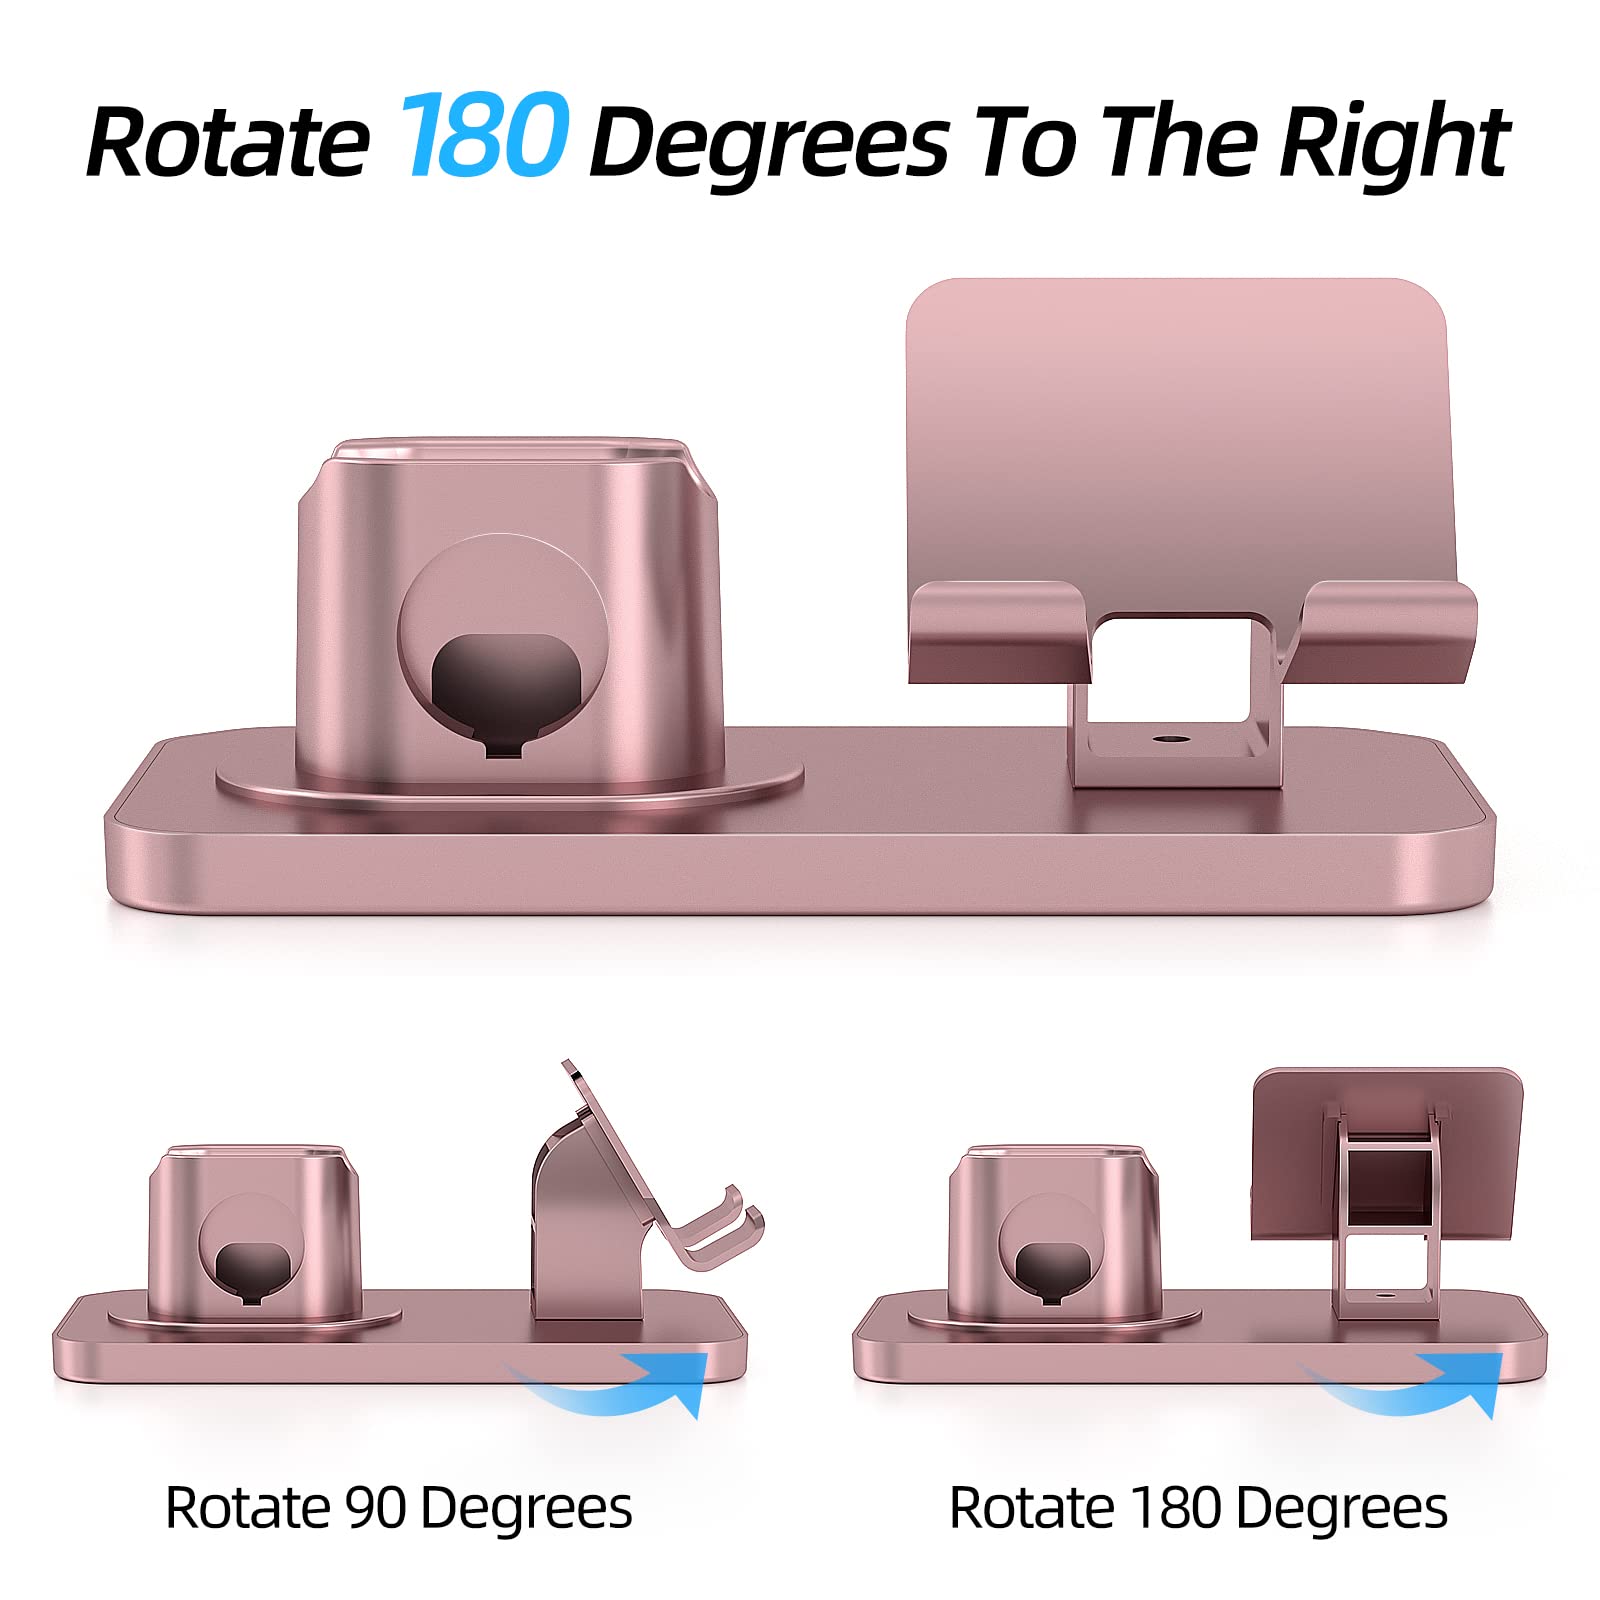 180°Rotation Phone Charger Stand Holder，3in1 Charger Dock, Charging Stand for iPhone/Apple Watch/Airpods/ipad and Most Smartphones (Rose Gold)